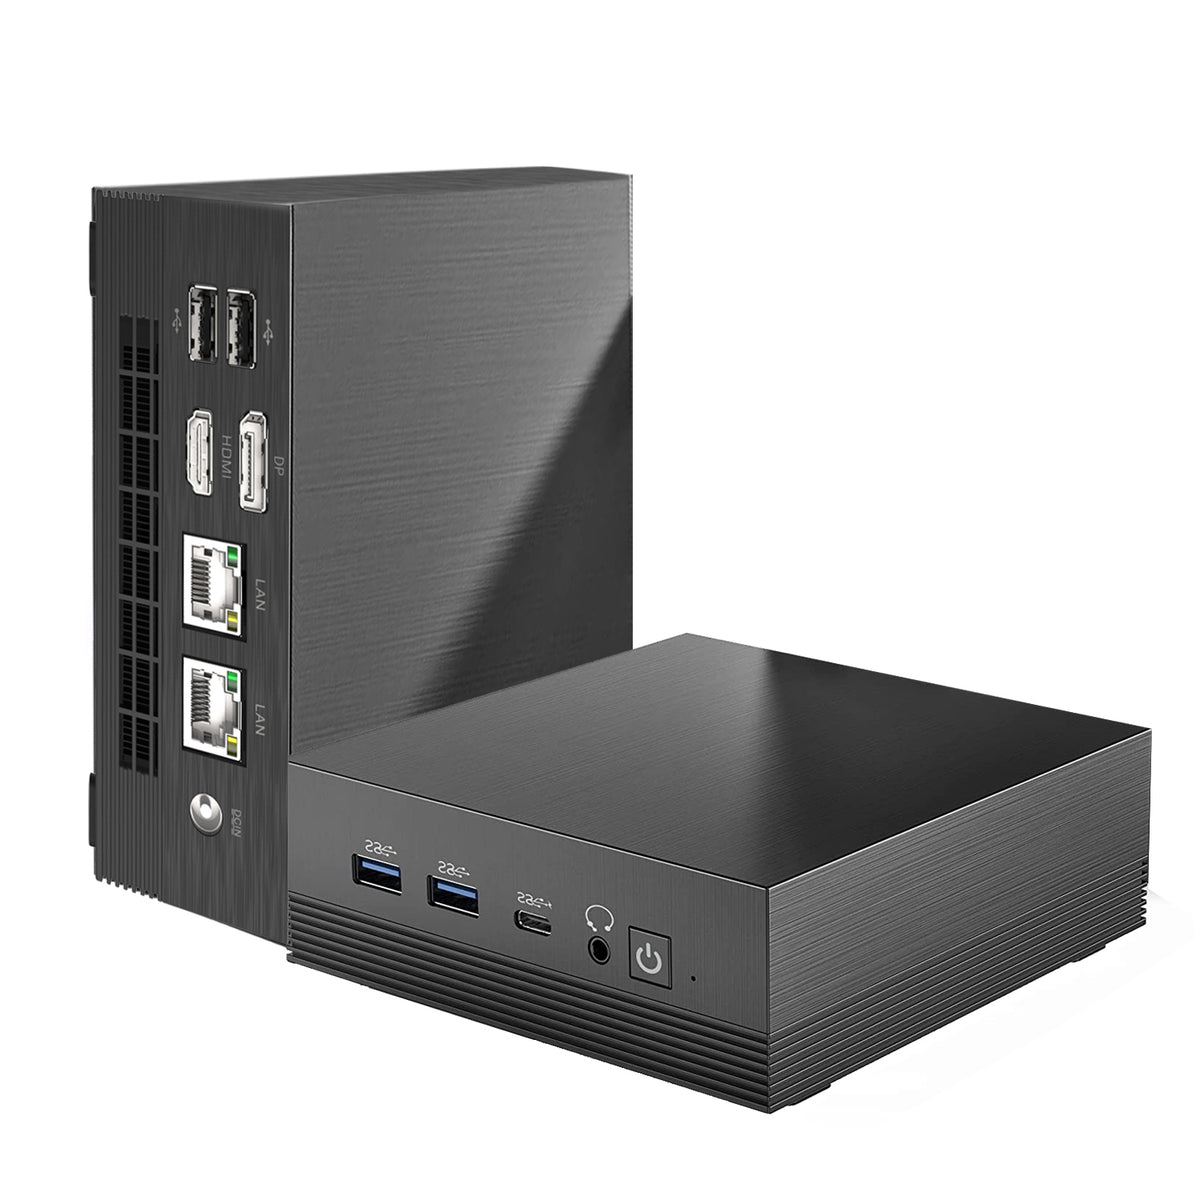 ATOPNUC Mini PC,AMD A9 9400 8GB RAM 128GB SSD Mini Computers,Dual 2.5 Gigabit Etherent Micro PC Support Extended HDD/SSD,WiFi5/BT5,HDMI/DP,for Home Office HTPC